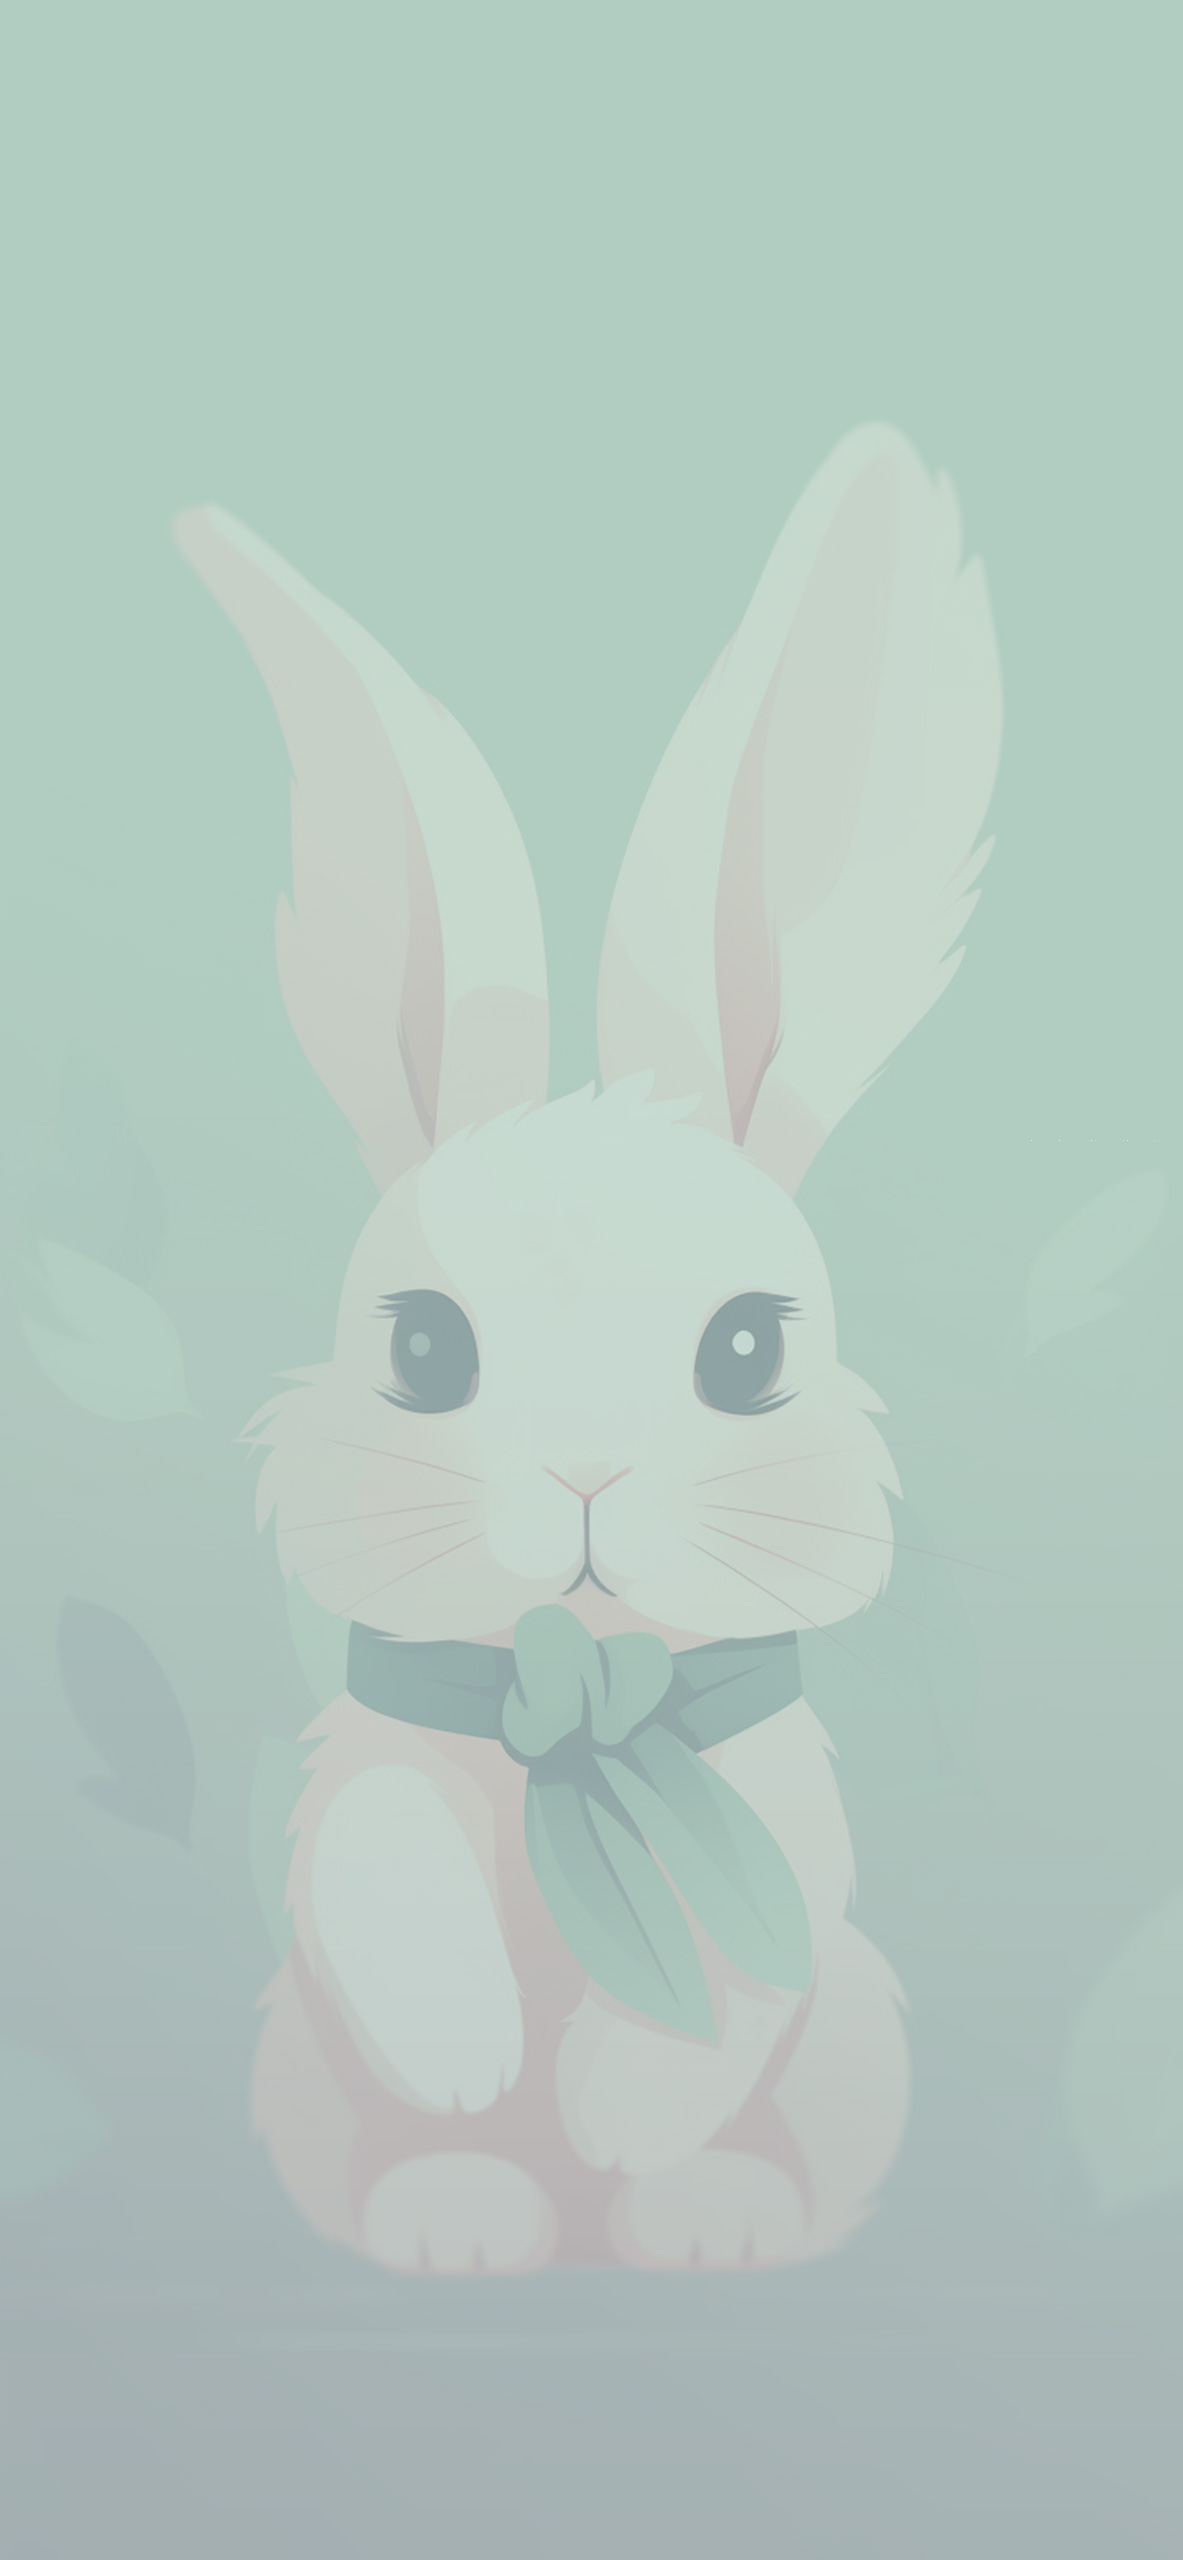 Cute Rabbit Holding Flower Live Wallpaper - free download